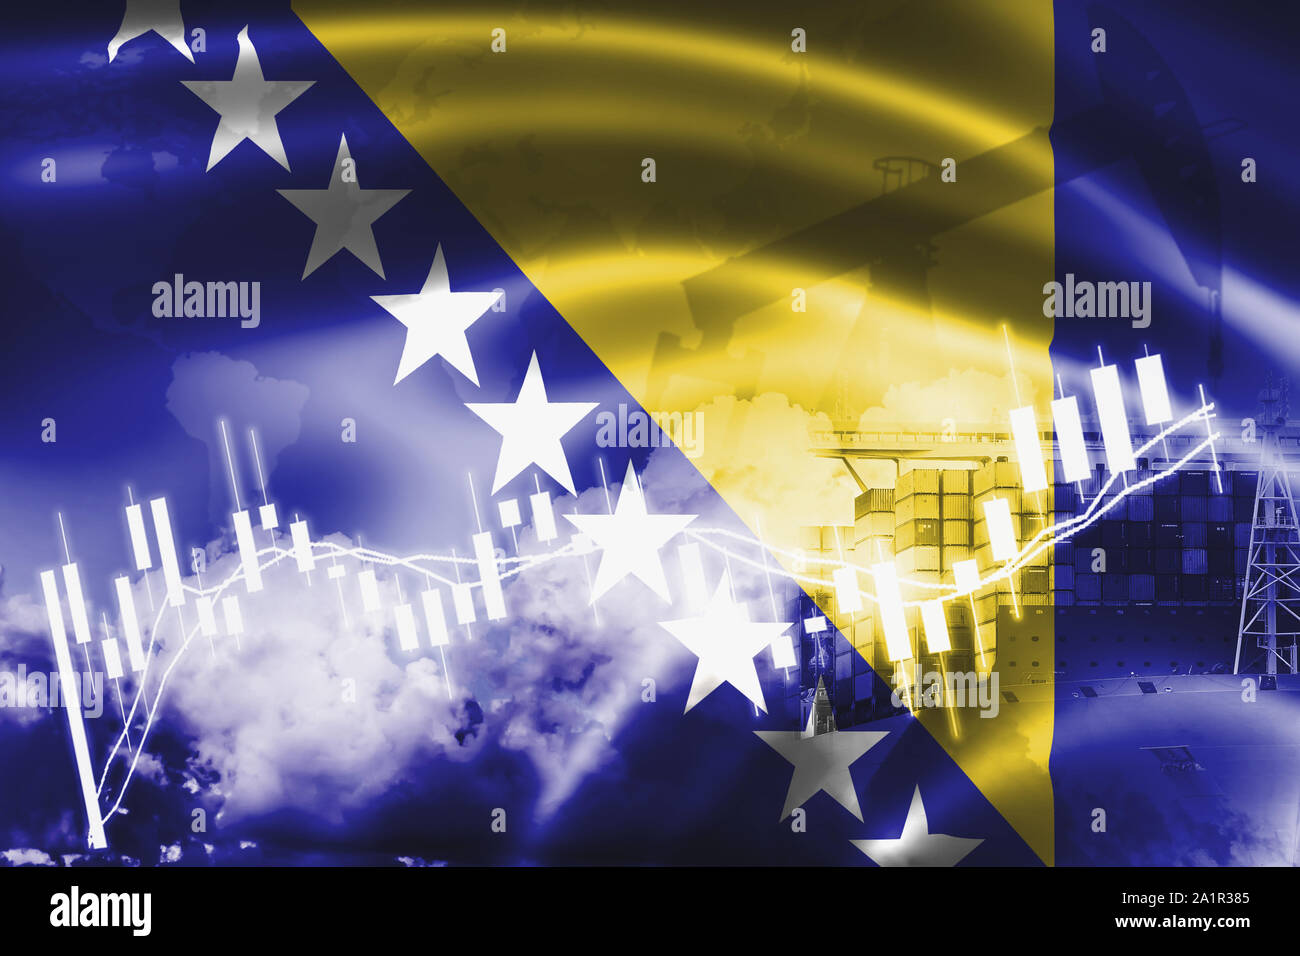 Bosnia and Herzegovina flag, stock market, exchange economy and Trade, oil production, container ship in export and import business and logistics. Stock Photo